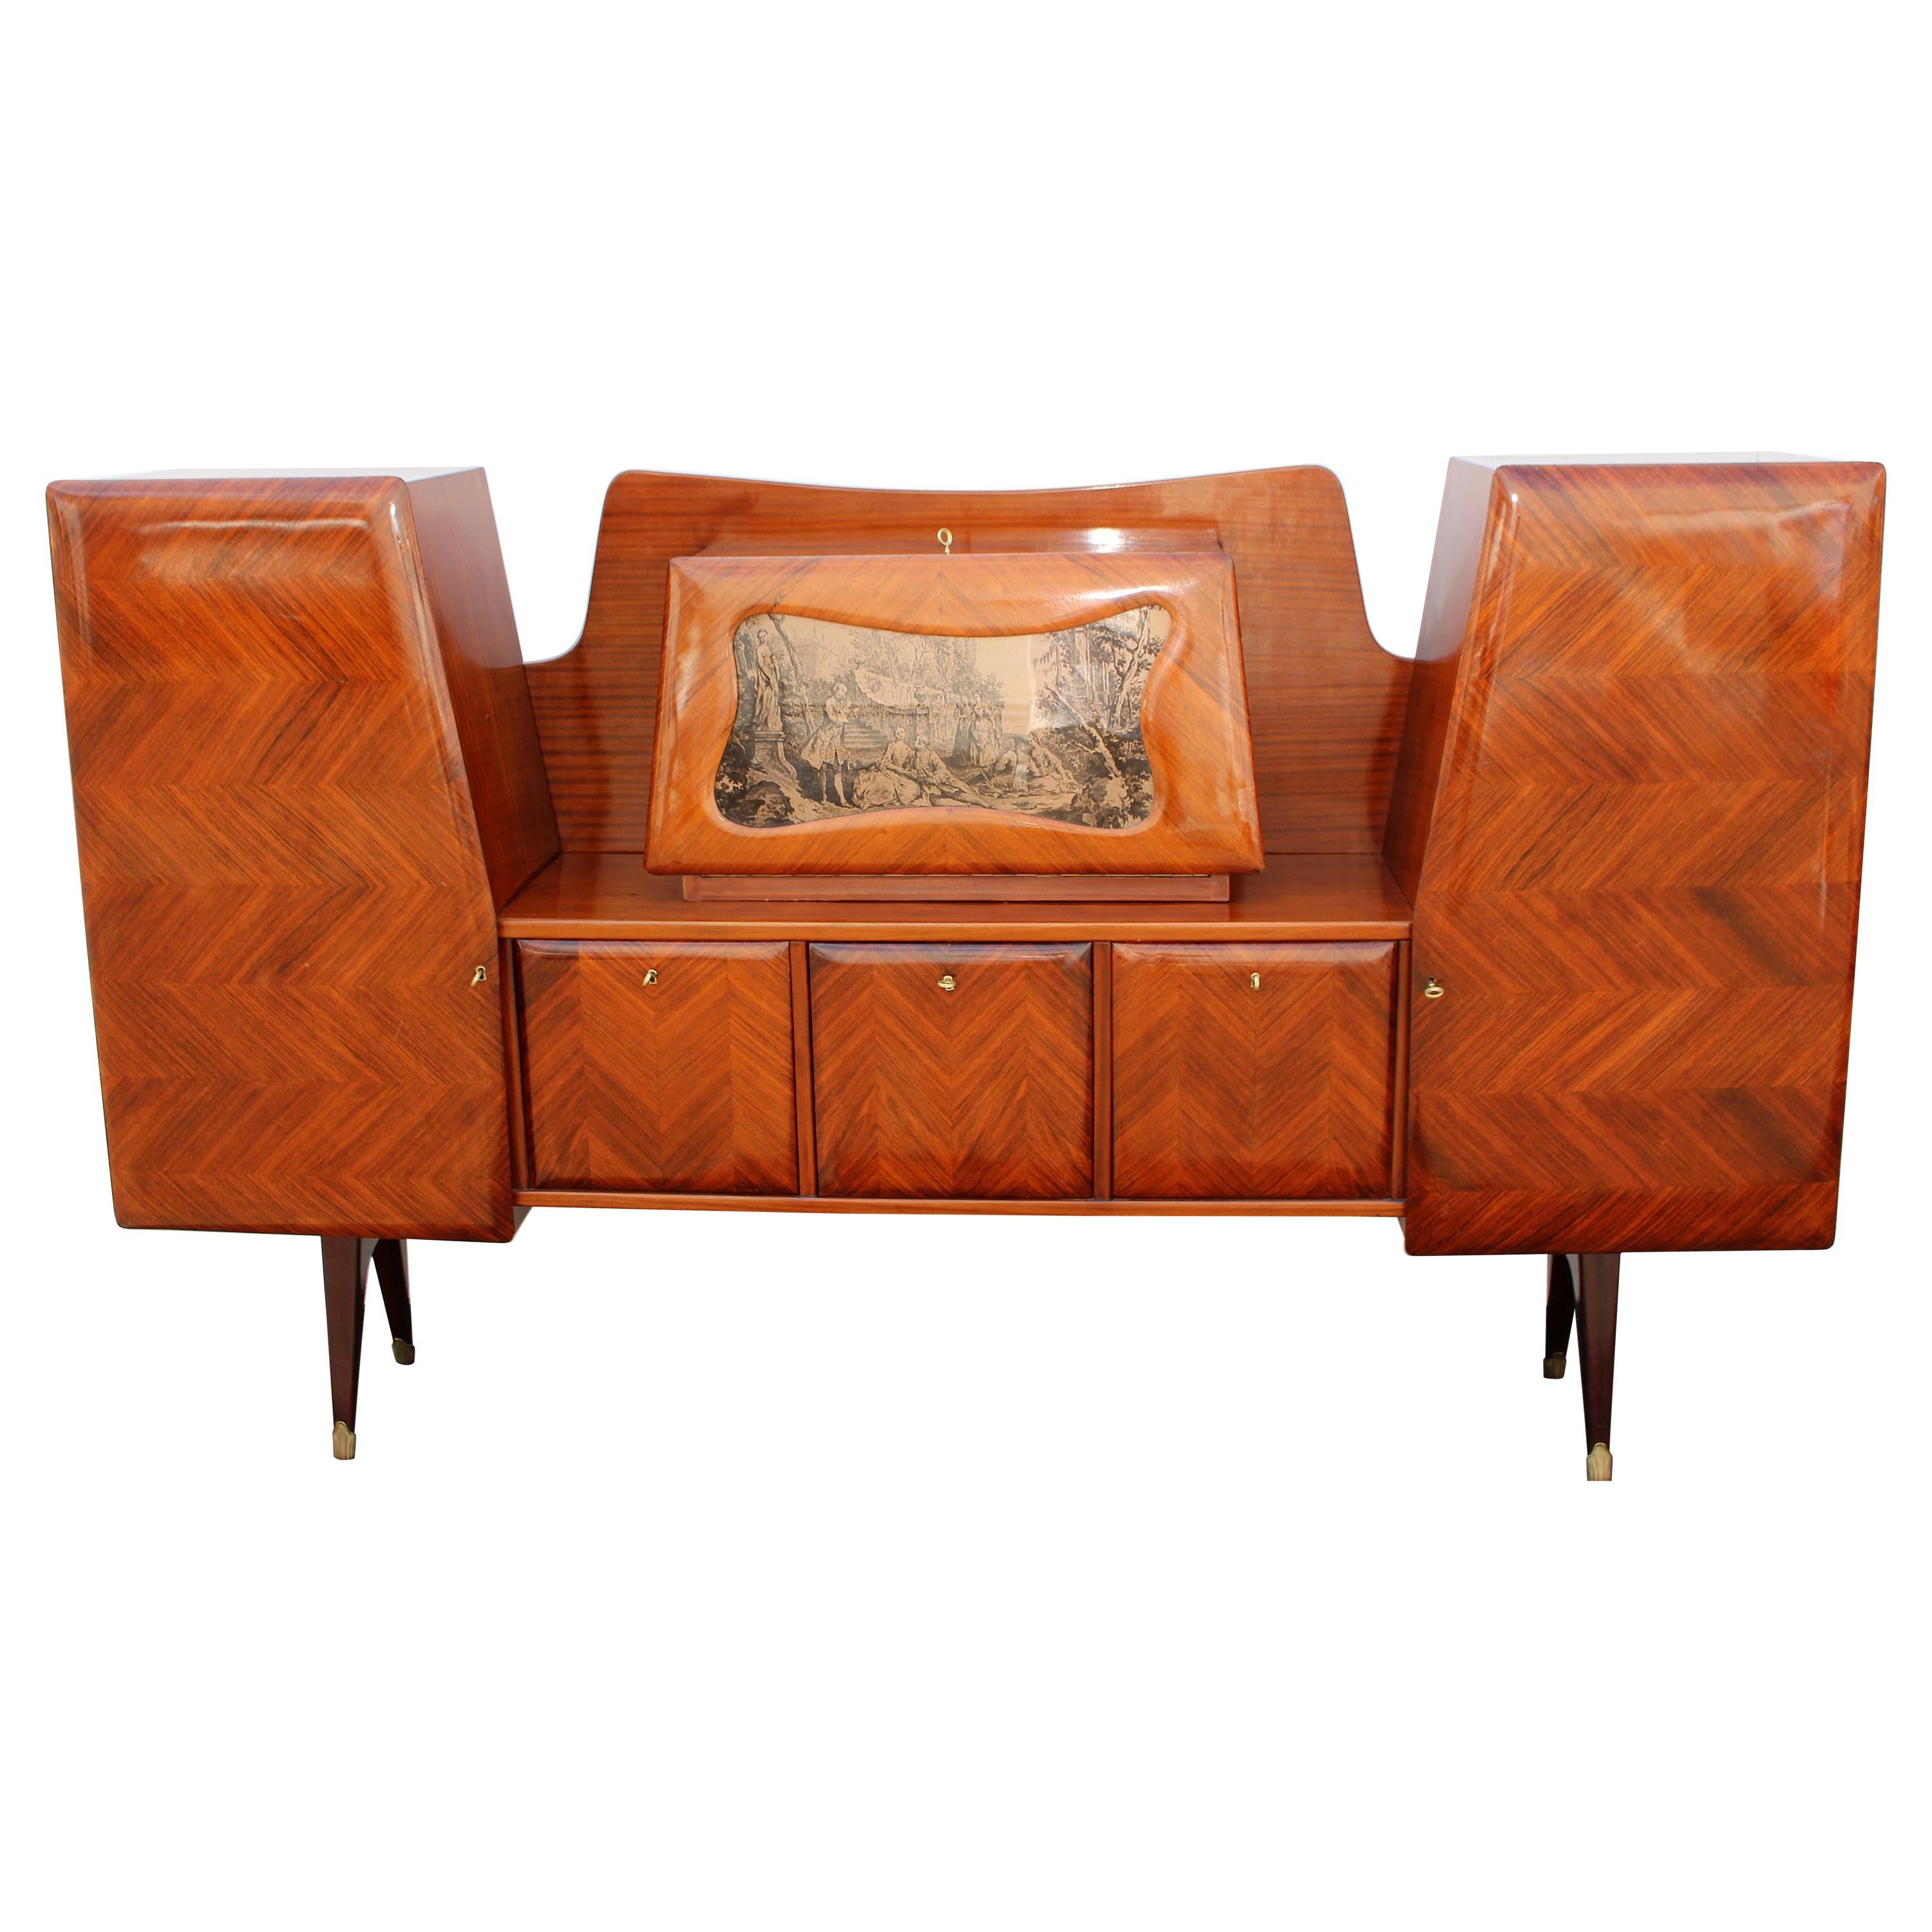 Paolo Buffa Attributed Rosewood Parquetry Buffet